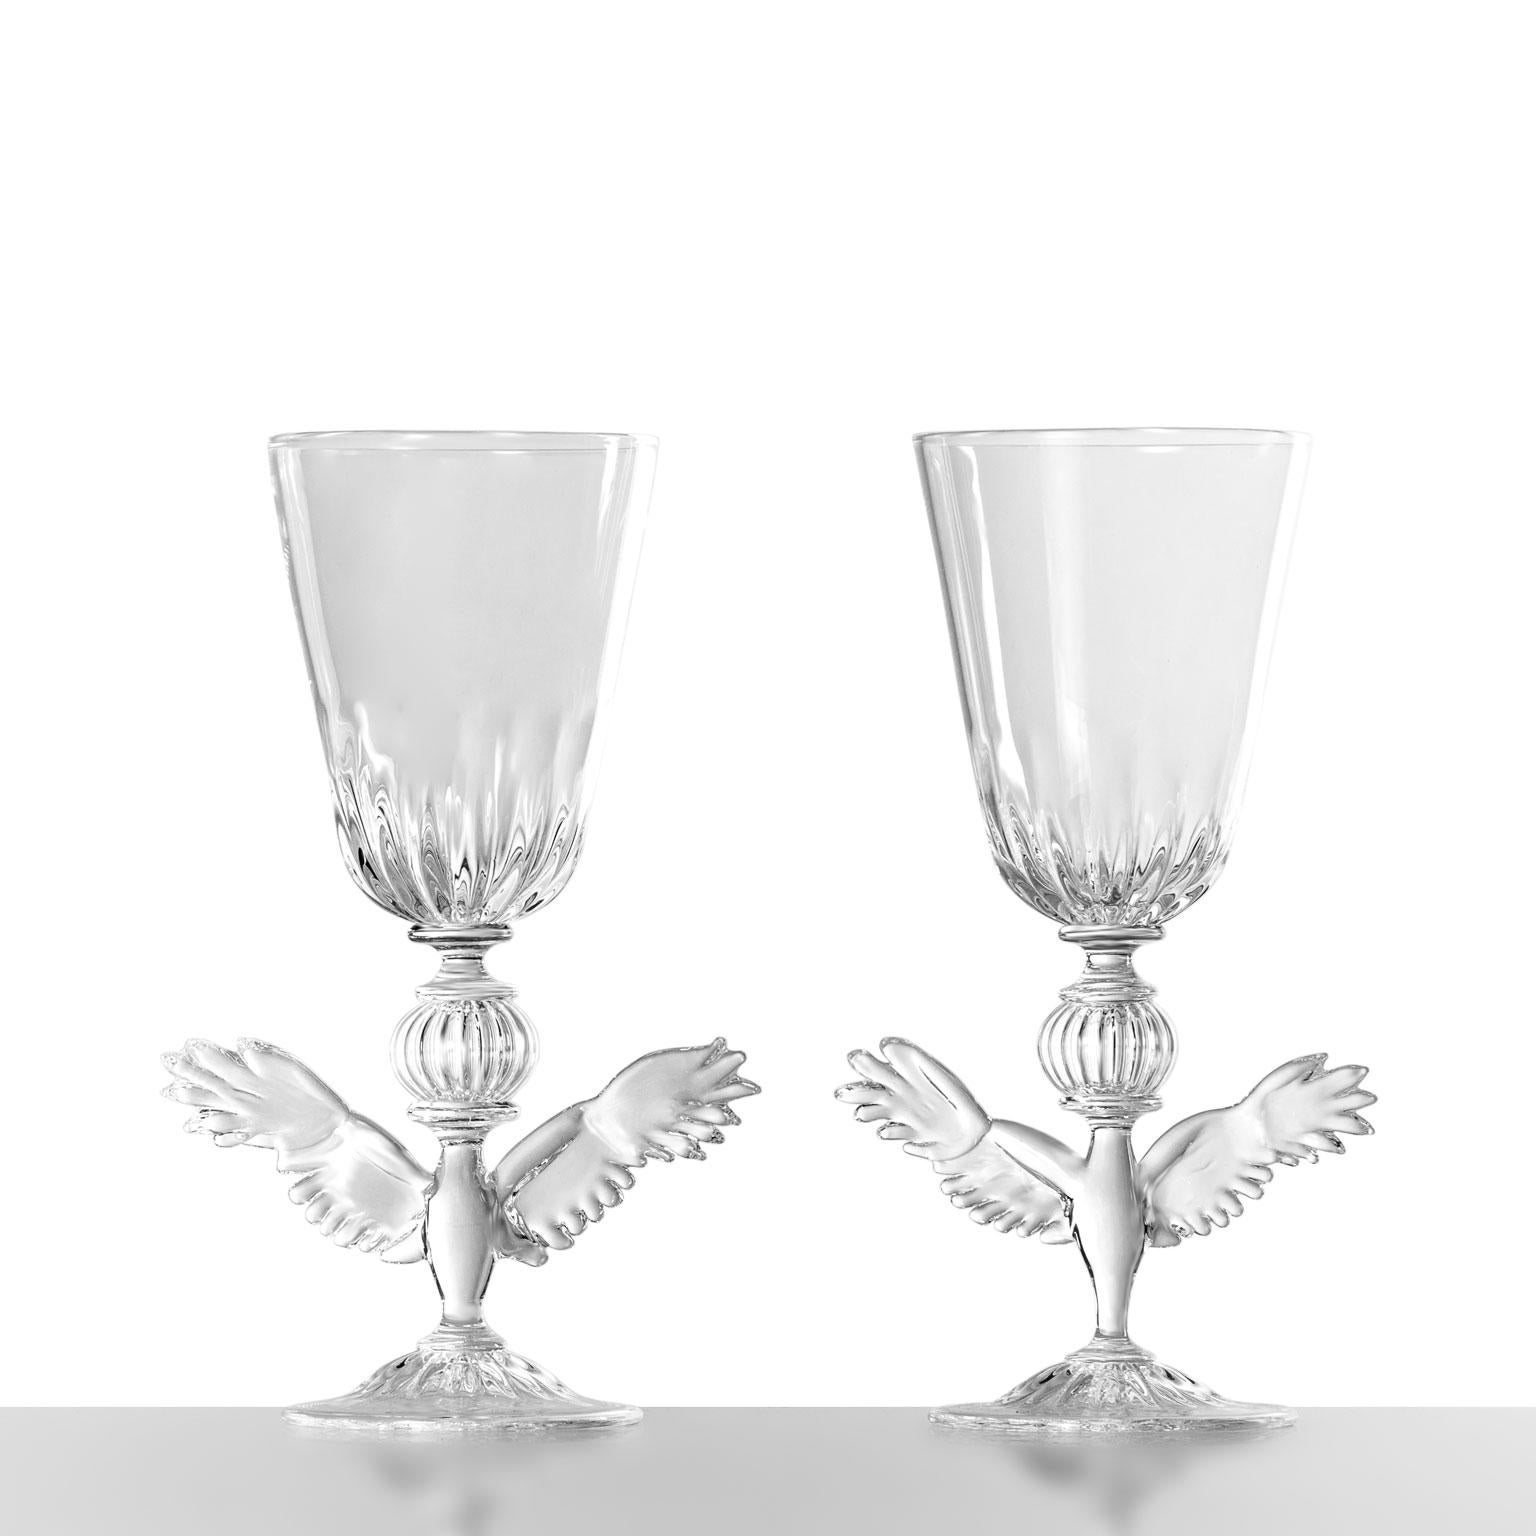 Modern Contemporary Trionfo Hand-Blown Glass Sculptured A pair of  Decorative Goblets  For Sale